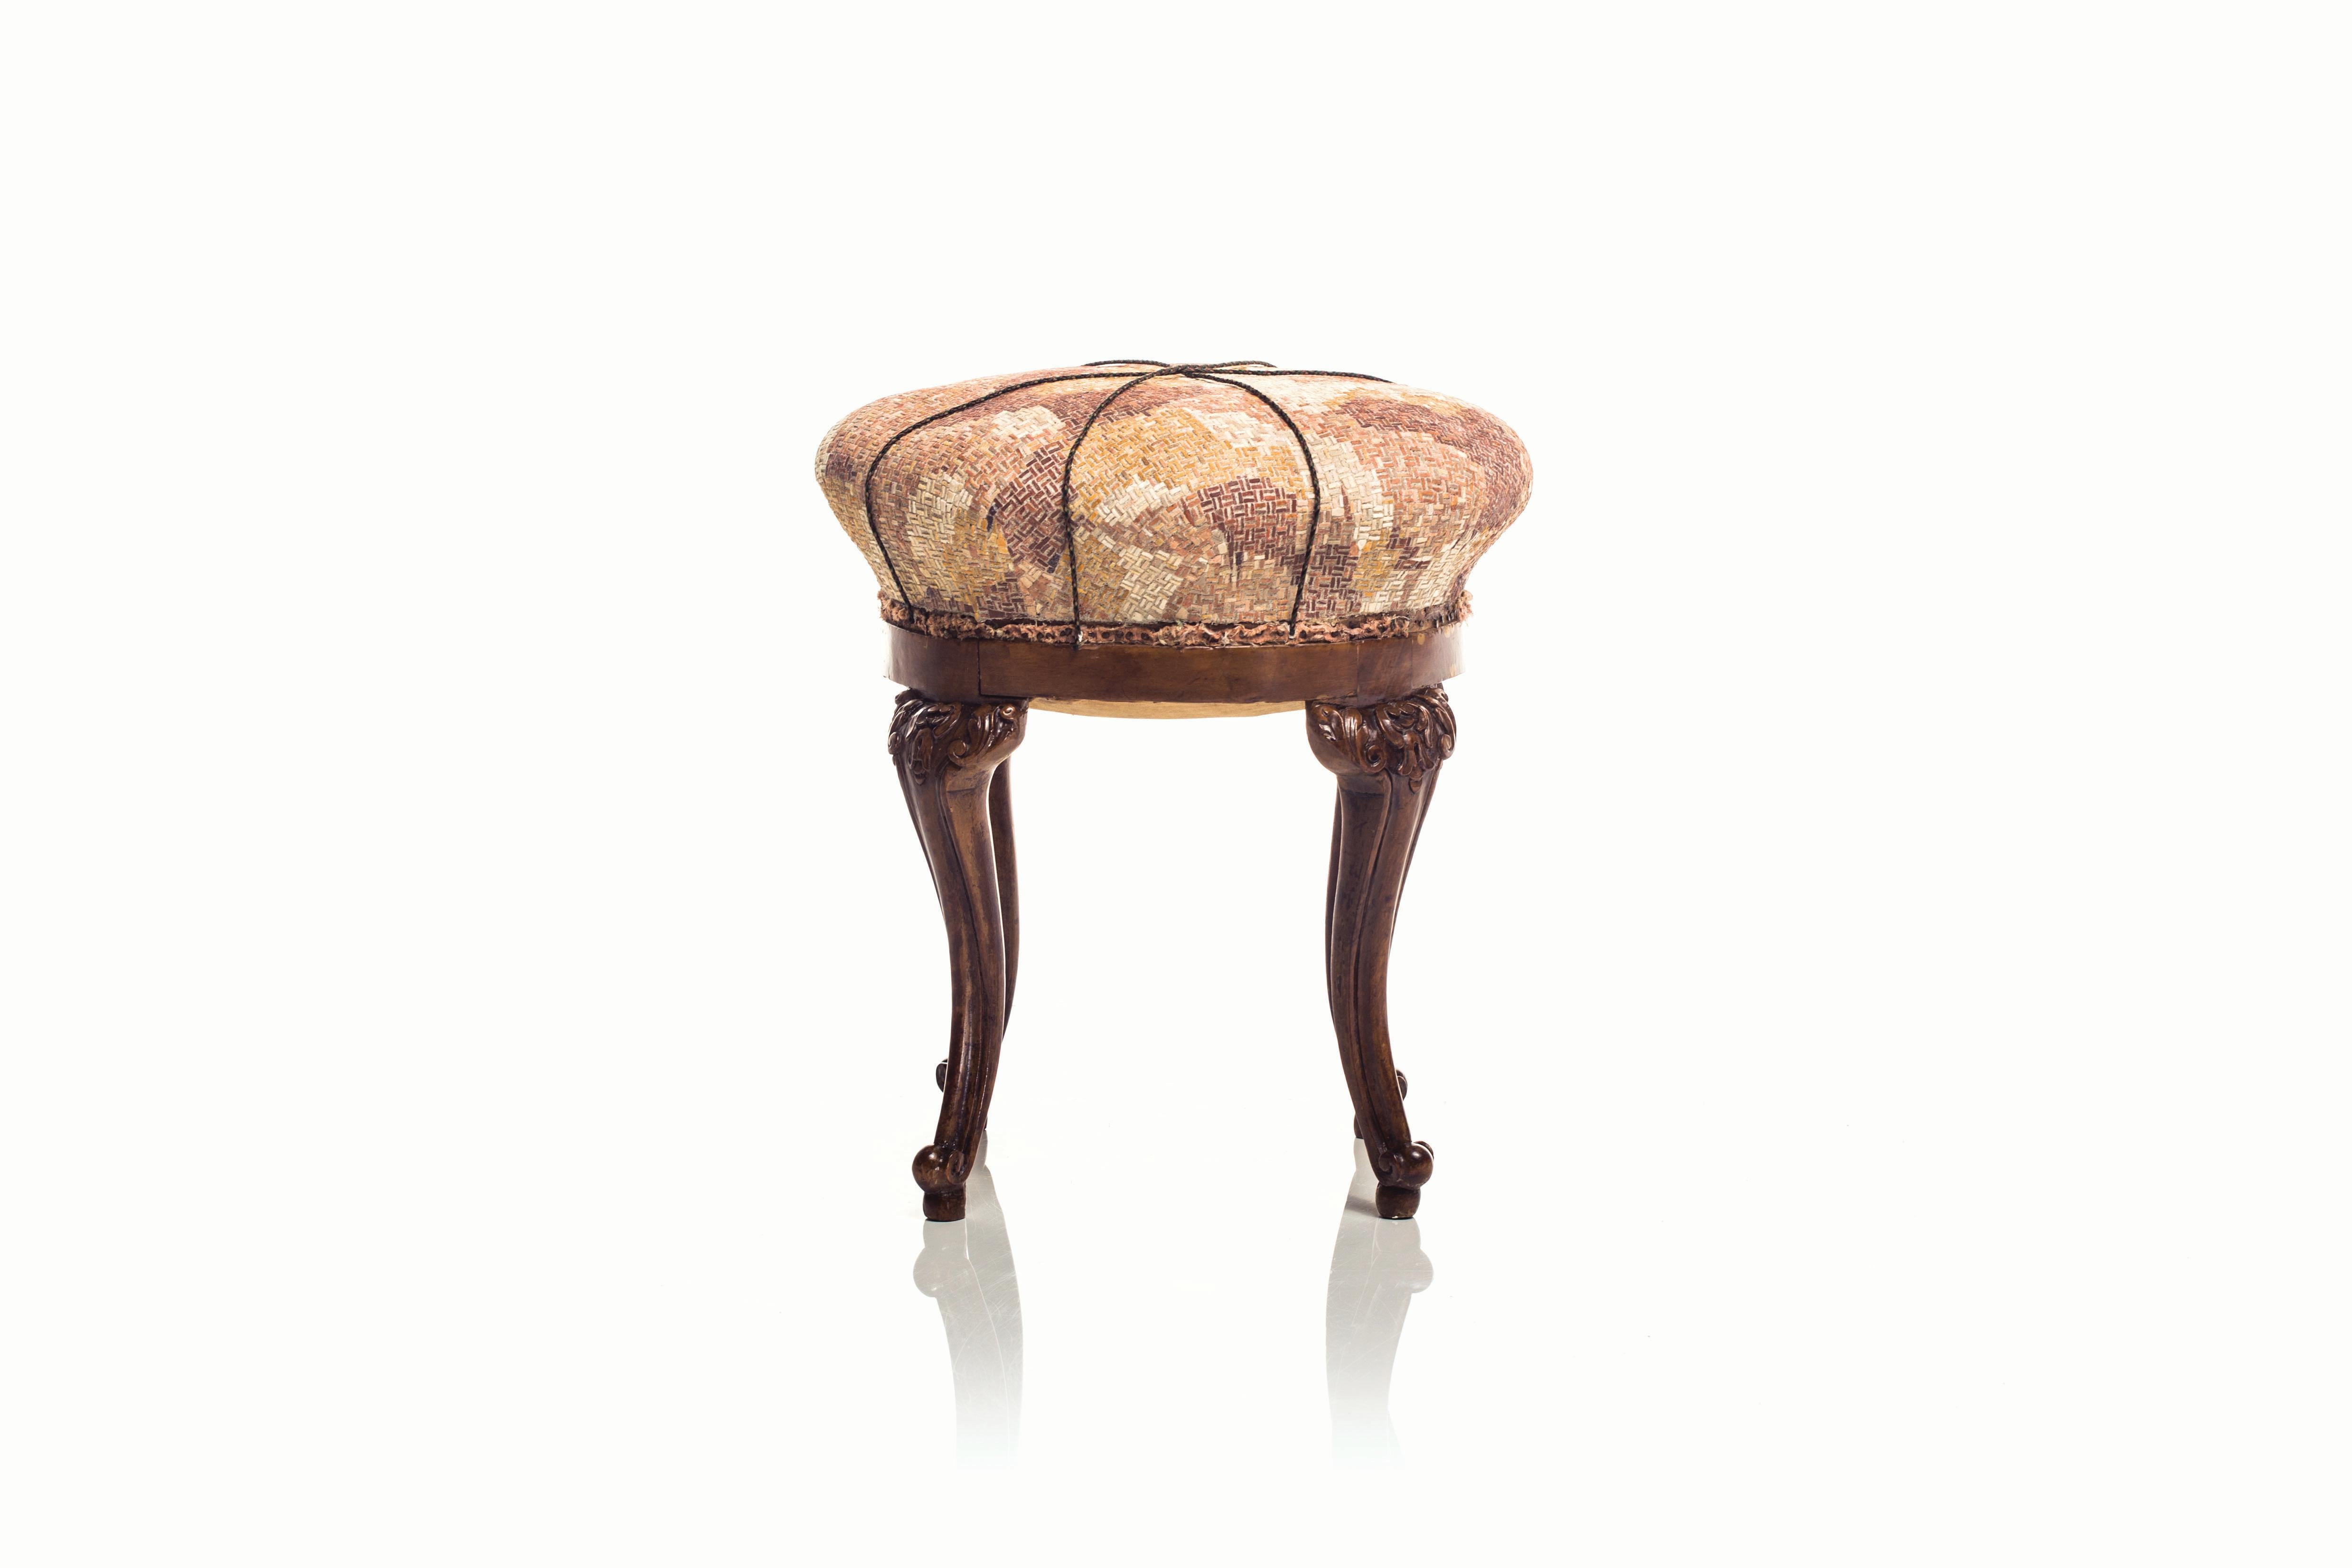 Sgabello Camouflage Antique wood stool by Yukiko Nagai
Dimensions: D40 x W40 x H45 cm
Material: Chestnut wood, Marble, Natural stone, Styrofoam, Glass fiber,
Resin, Cement, Stucco
Weight: 5 kg 

All pieces are handmade, so the colours and